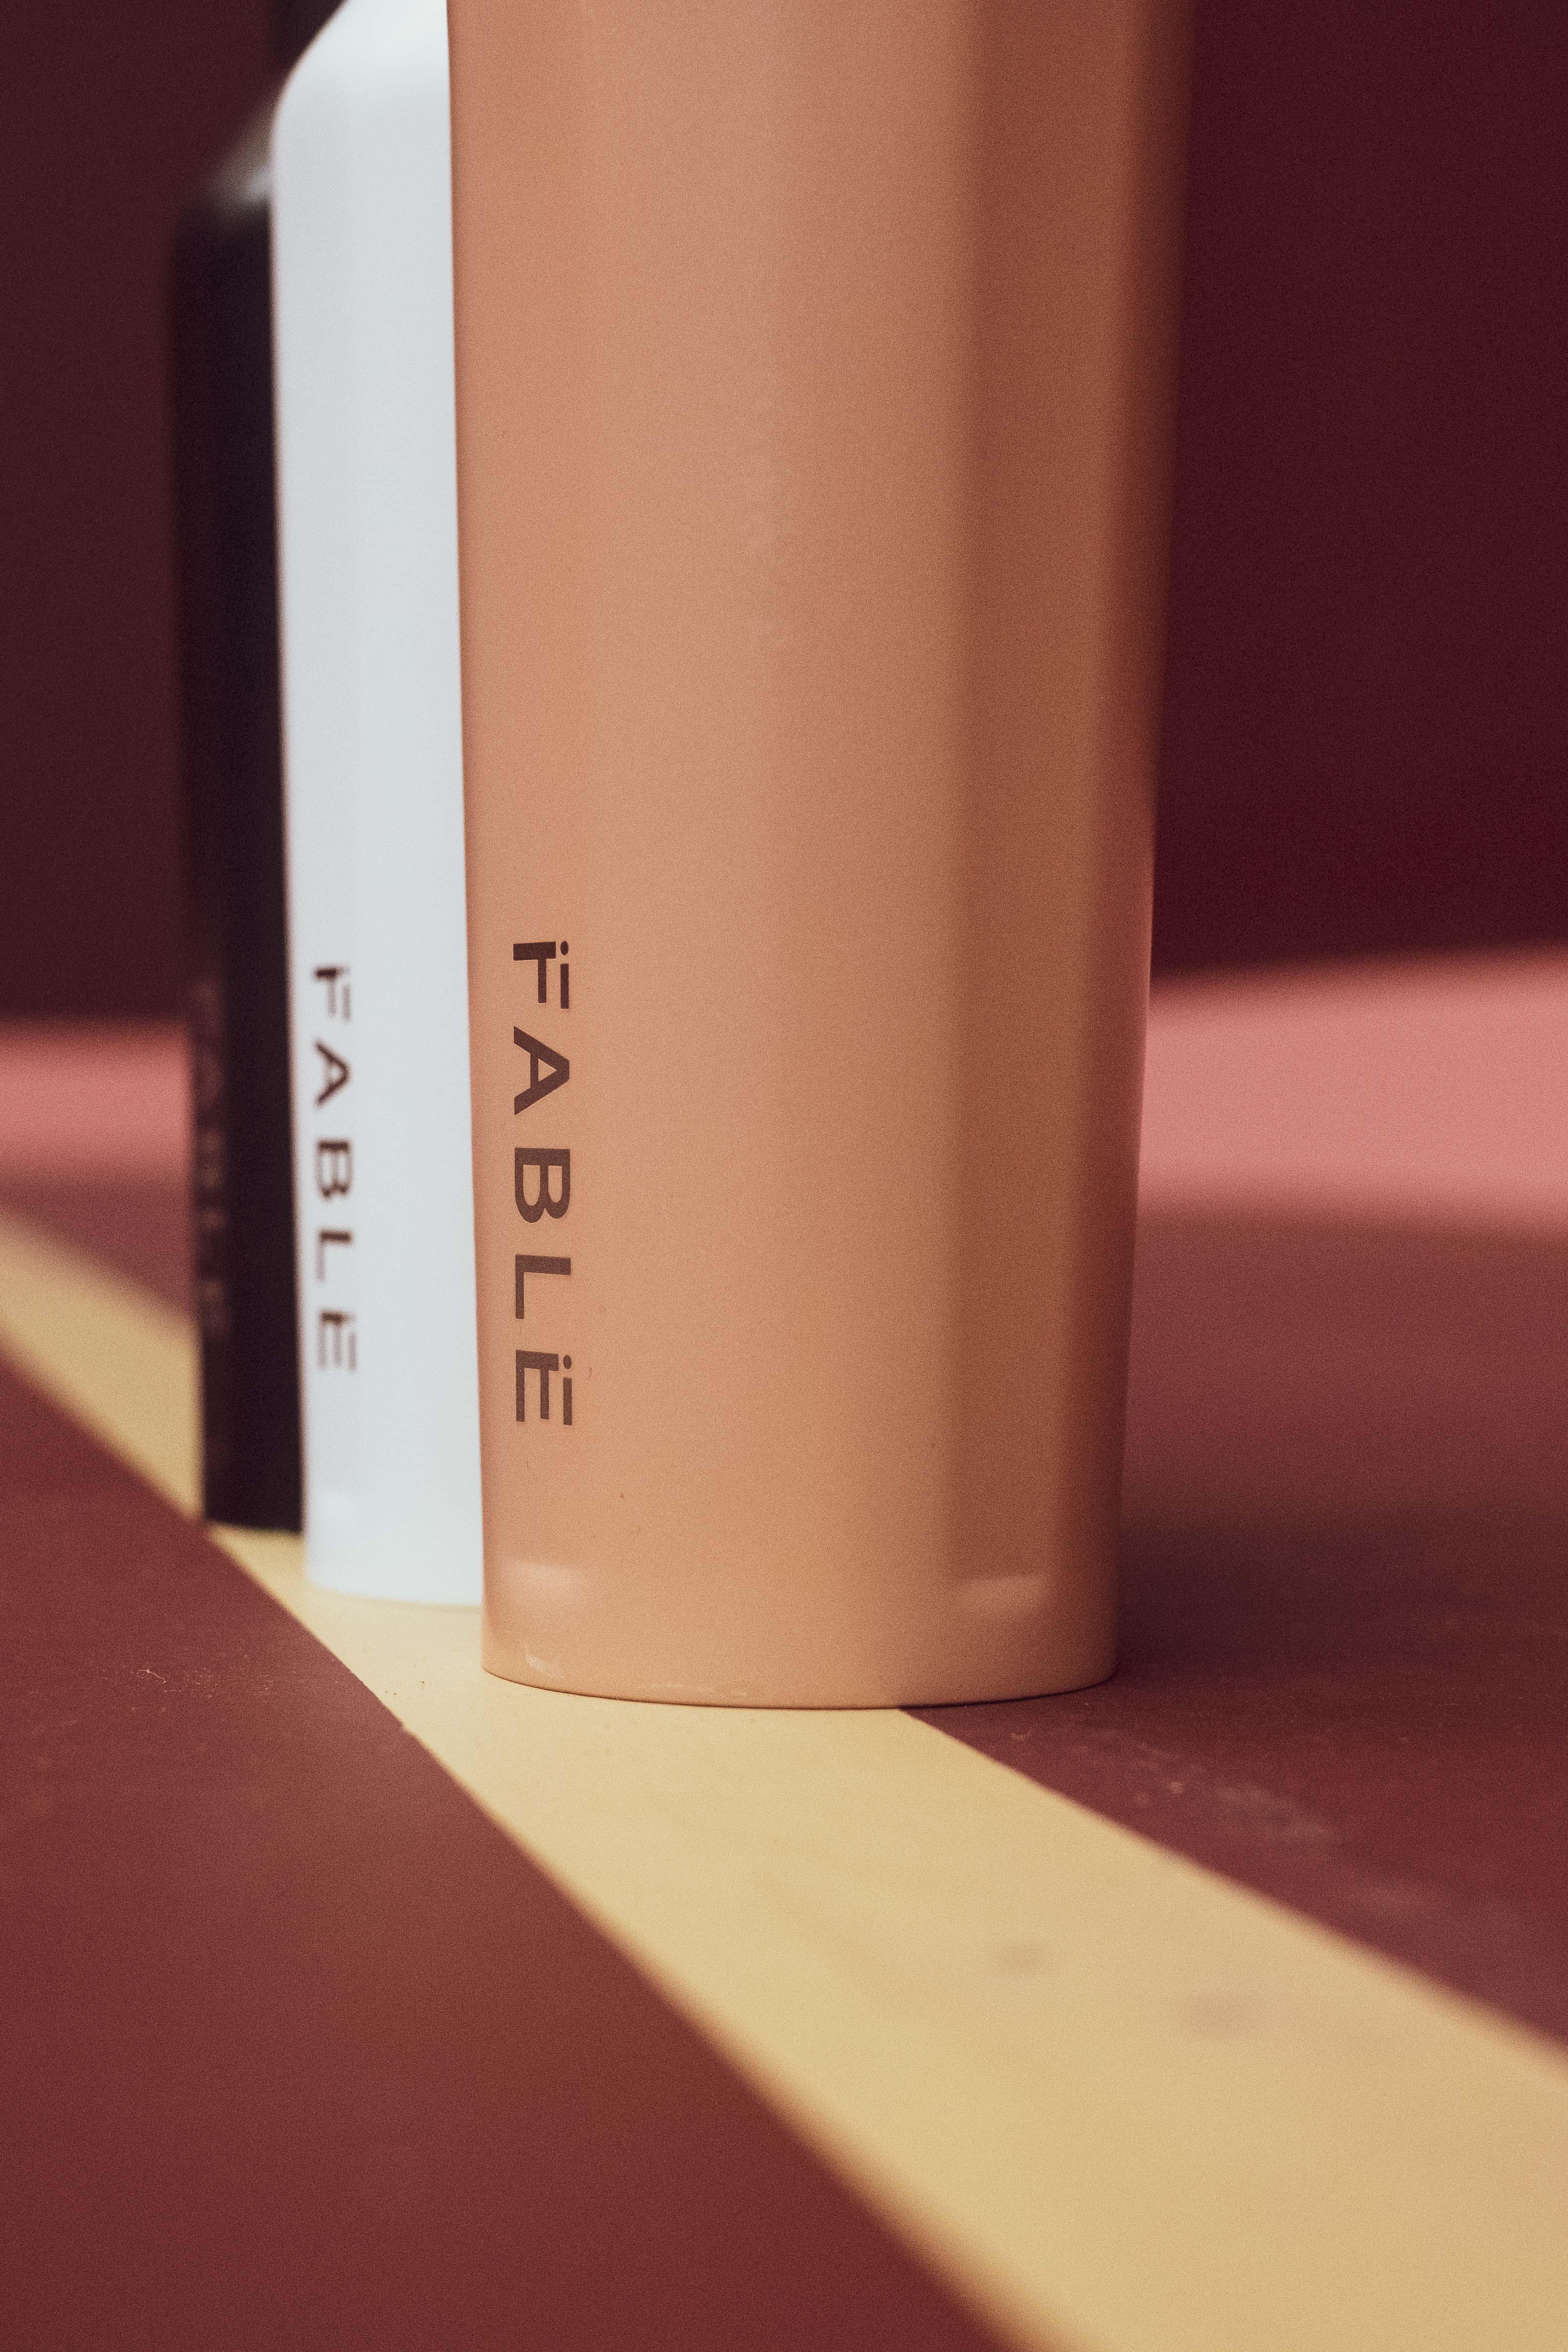 Blush Pink Stainless Steel Drinks Bottle From Fable Yoga